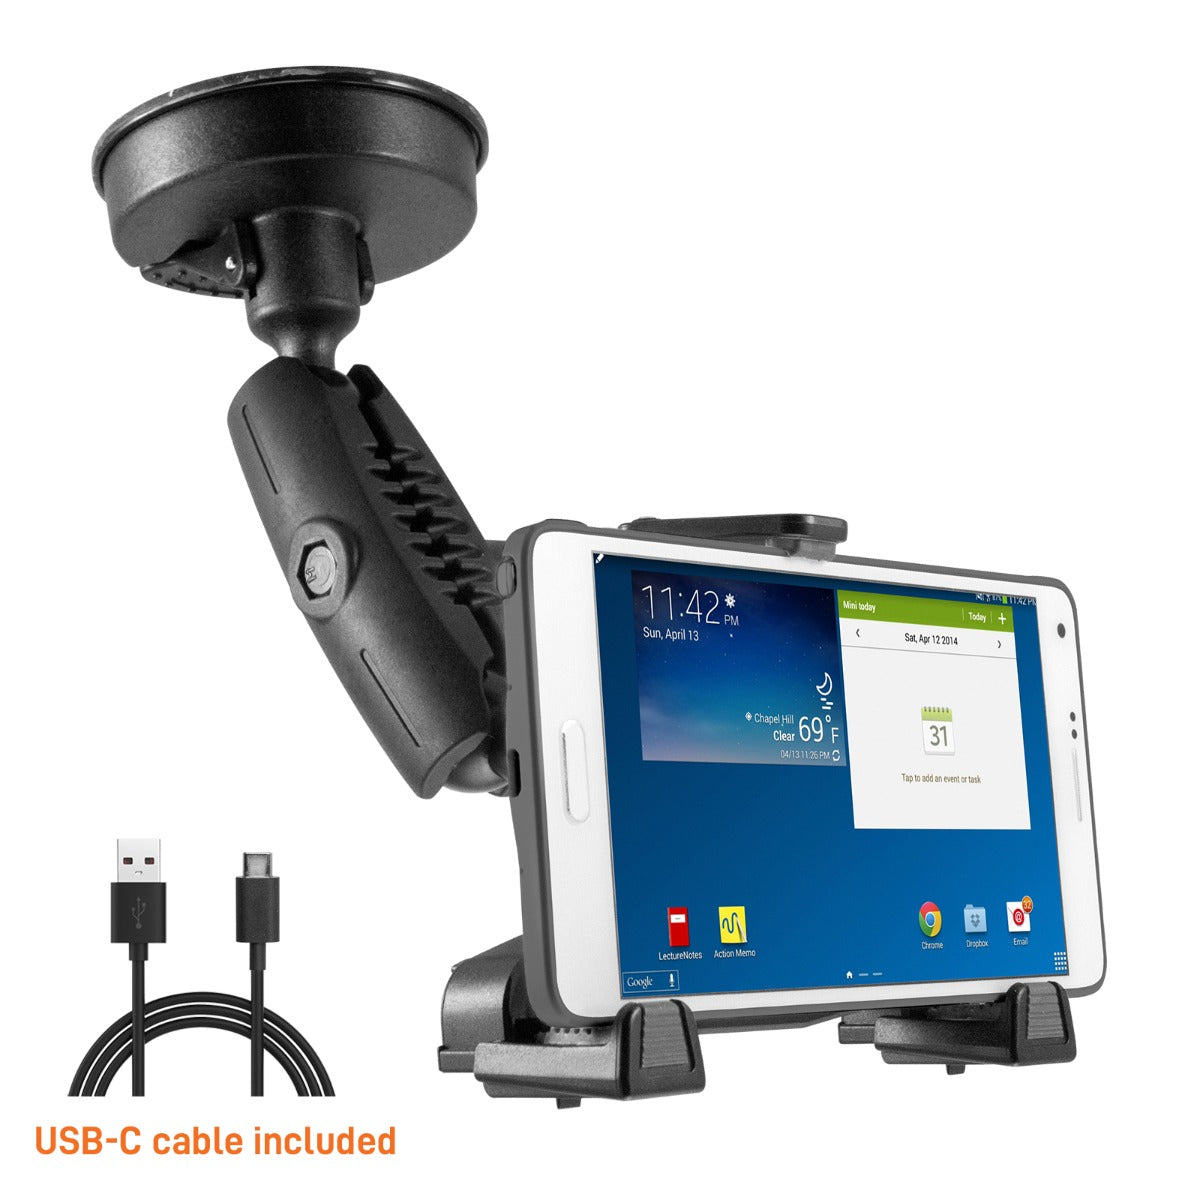 iBOLT xProDock™ NFC Bizmount™ - Phone Holder/Mount with Heavy Duty Suction Cup Base and 1.5m USB-C Cable